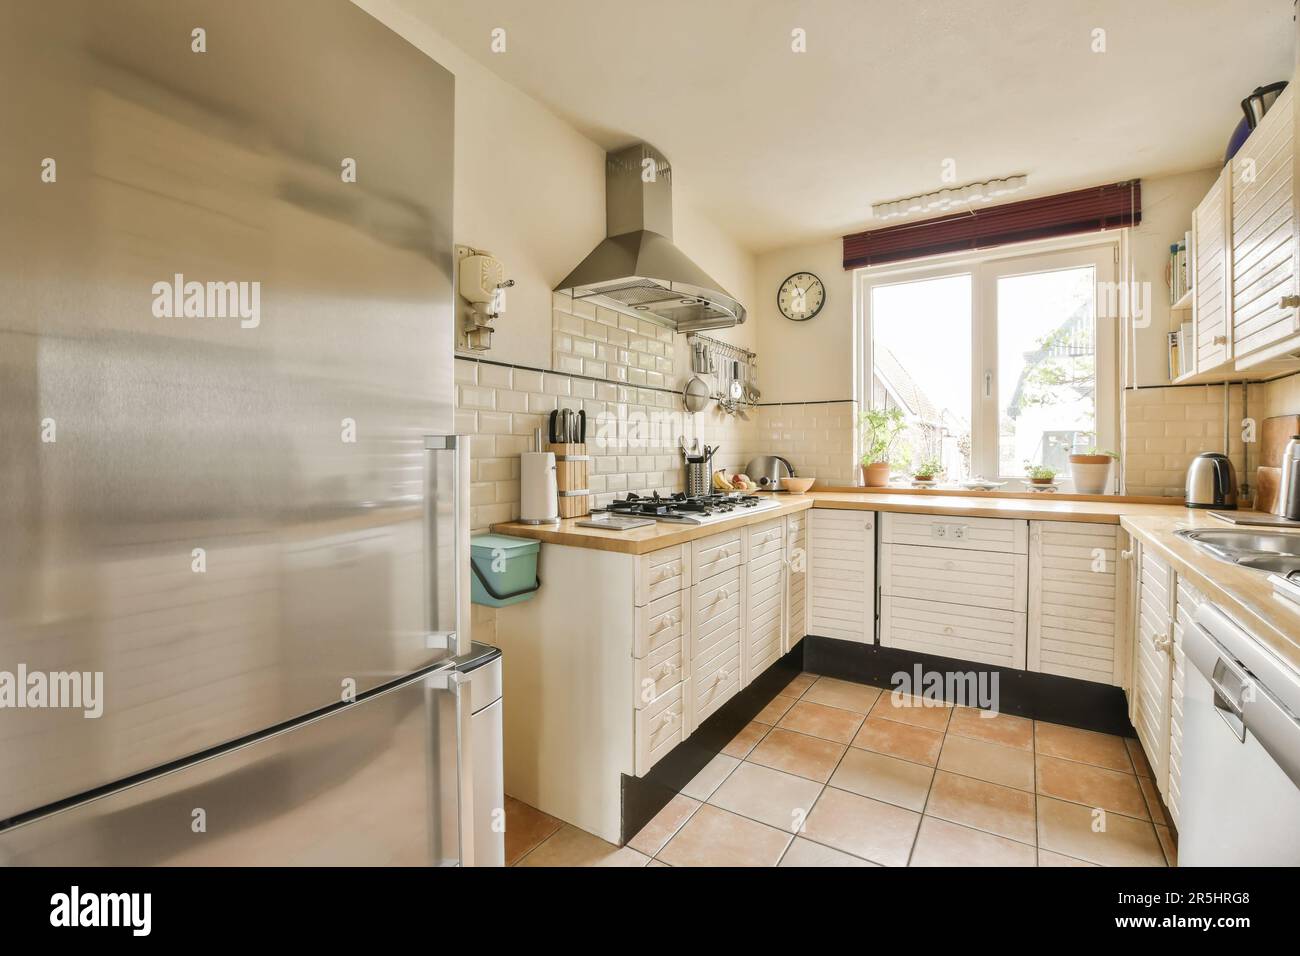 a kitchen with an oven, sink and dishwasher on the floor in front of the refrigerator freezer Stock Photo